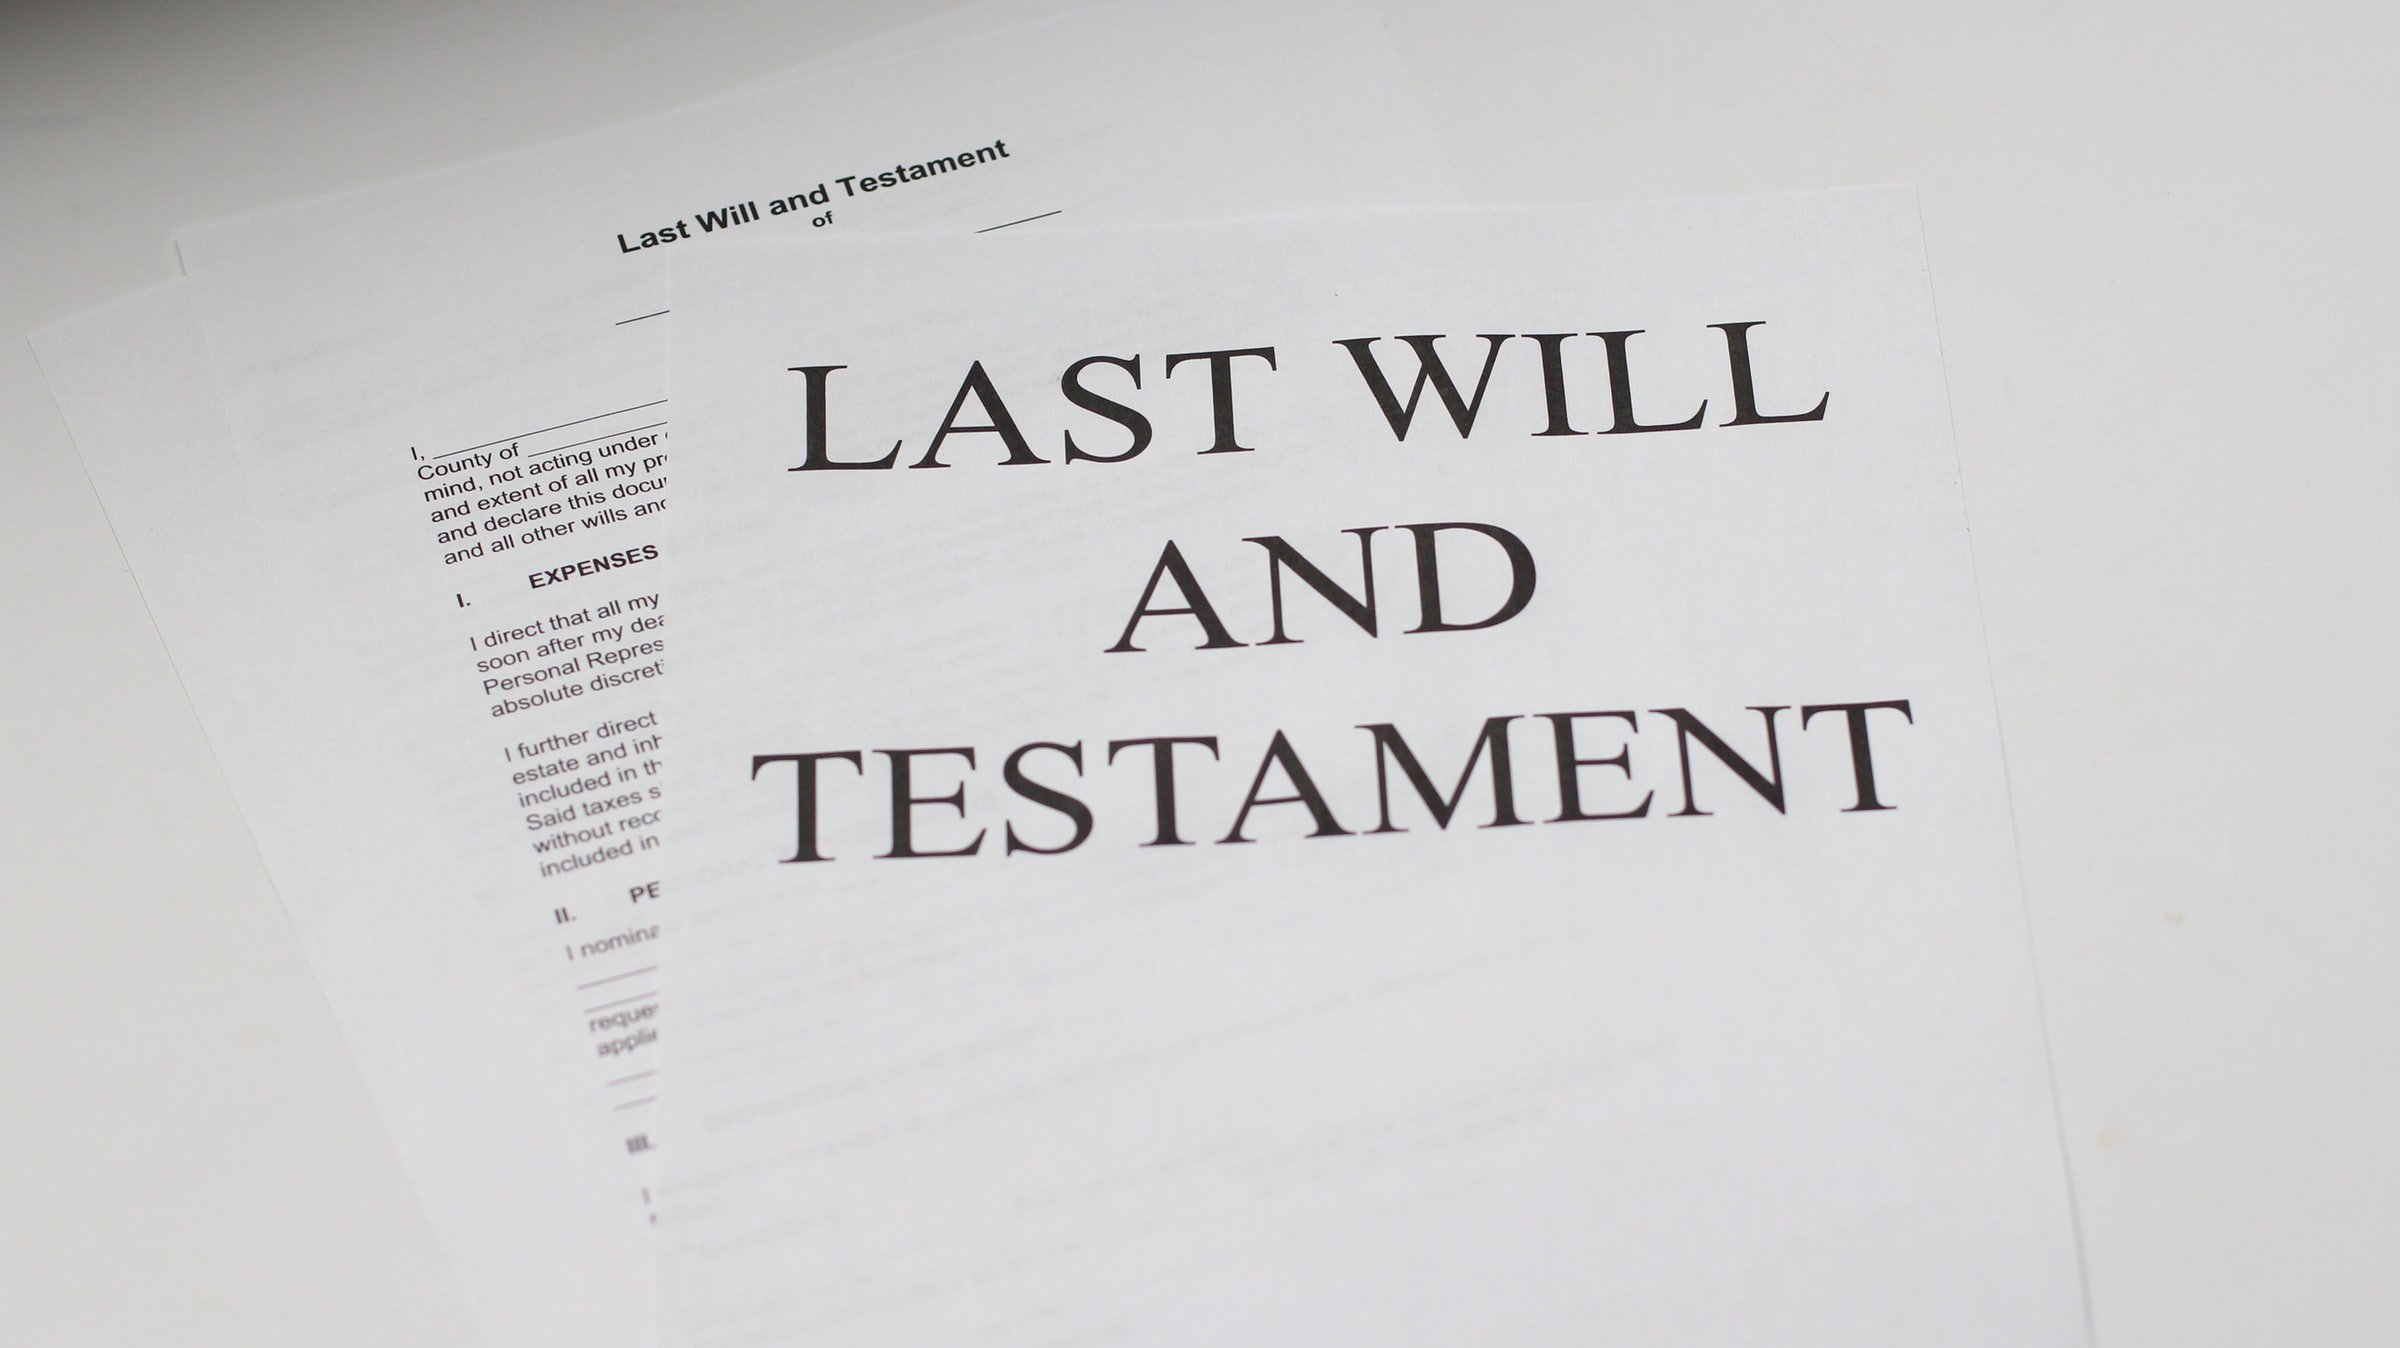 Last will and Testament papers. | Source: Unsplash